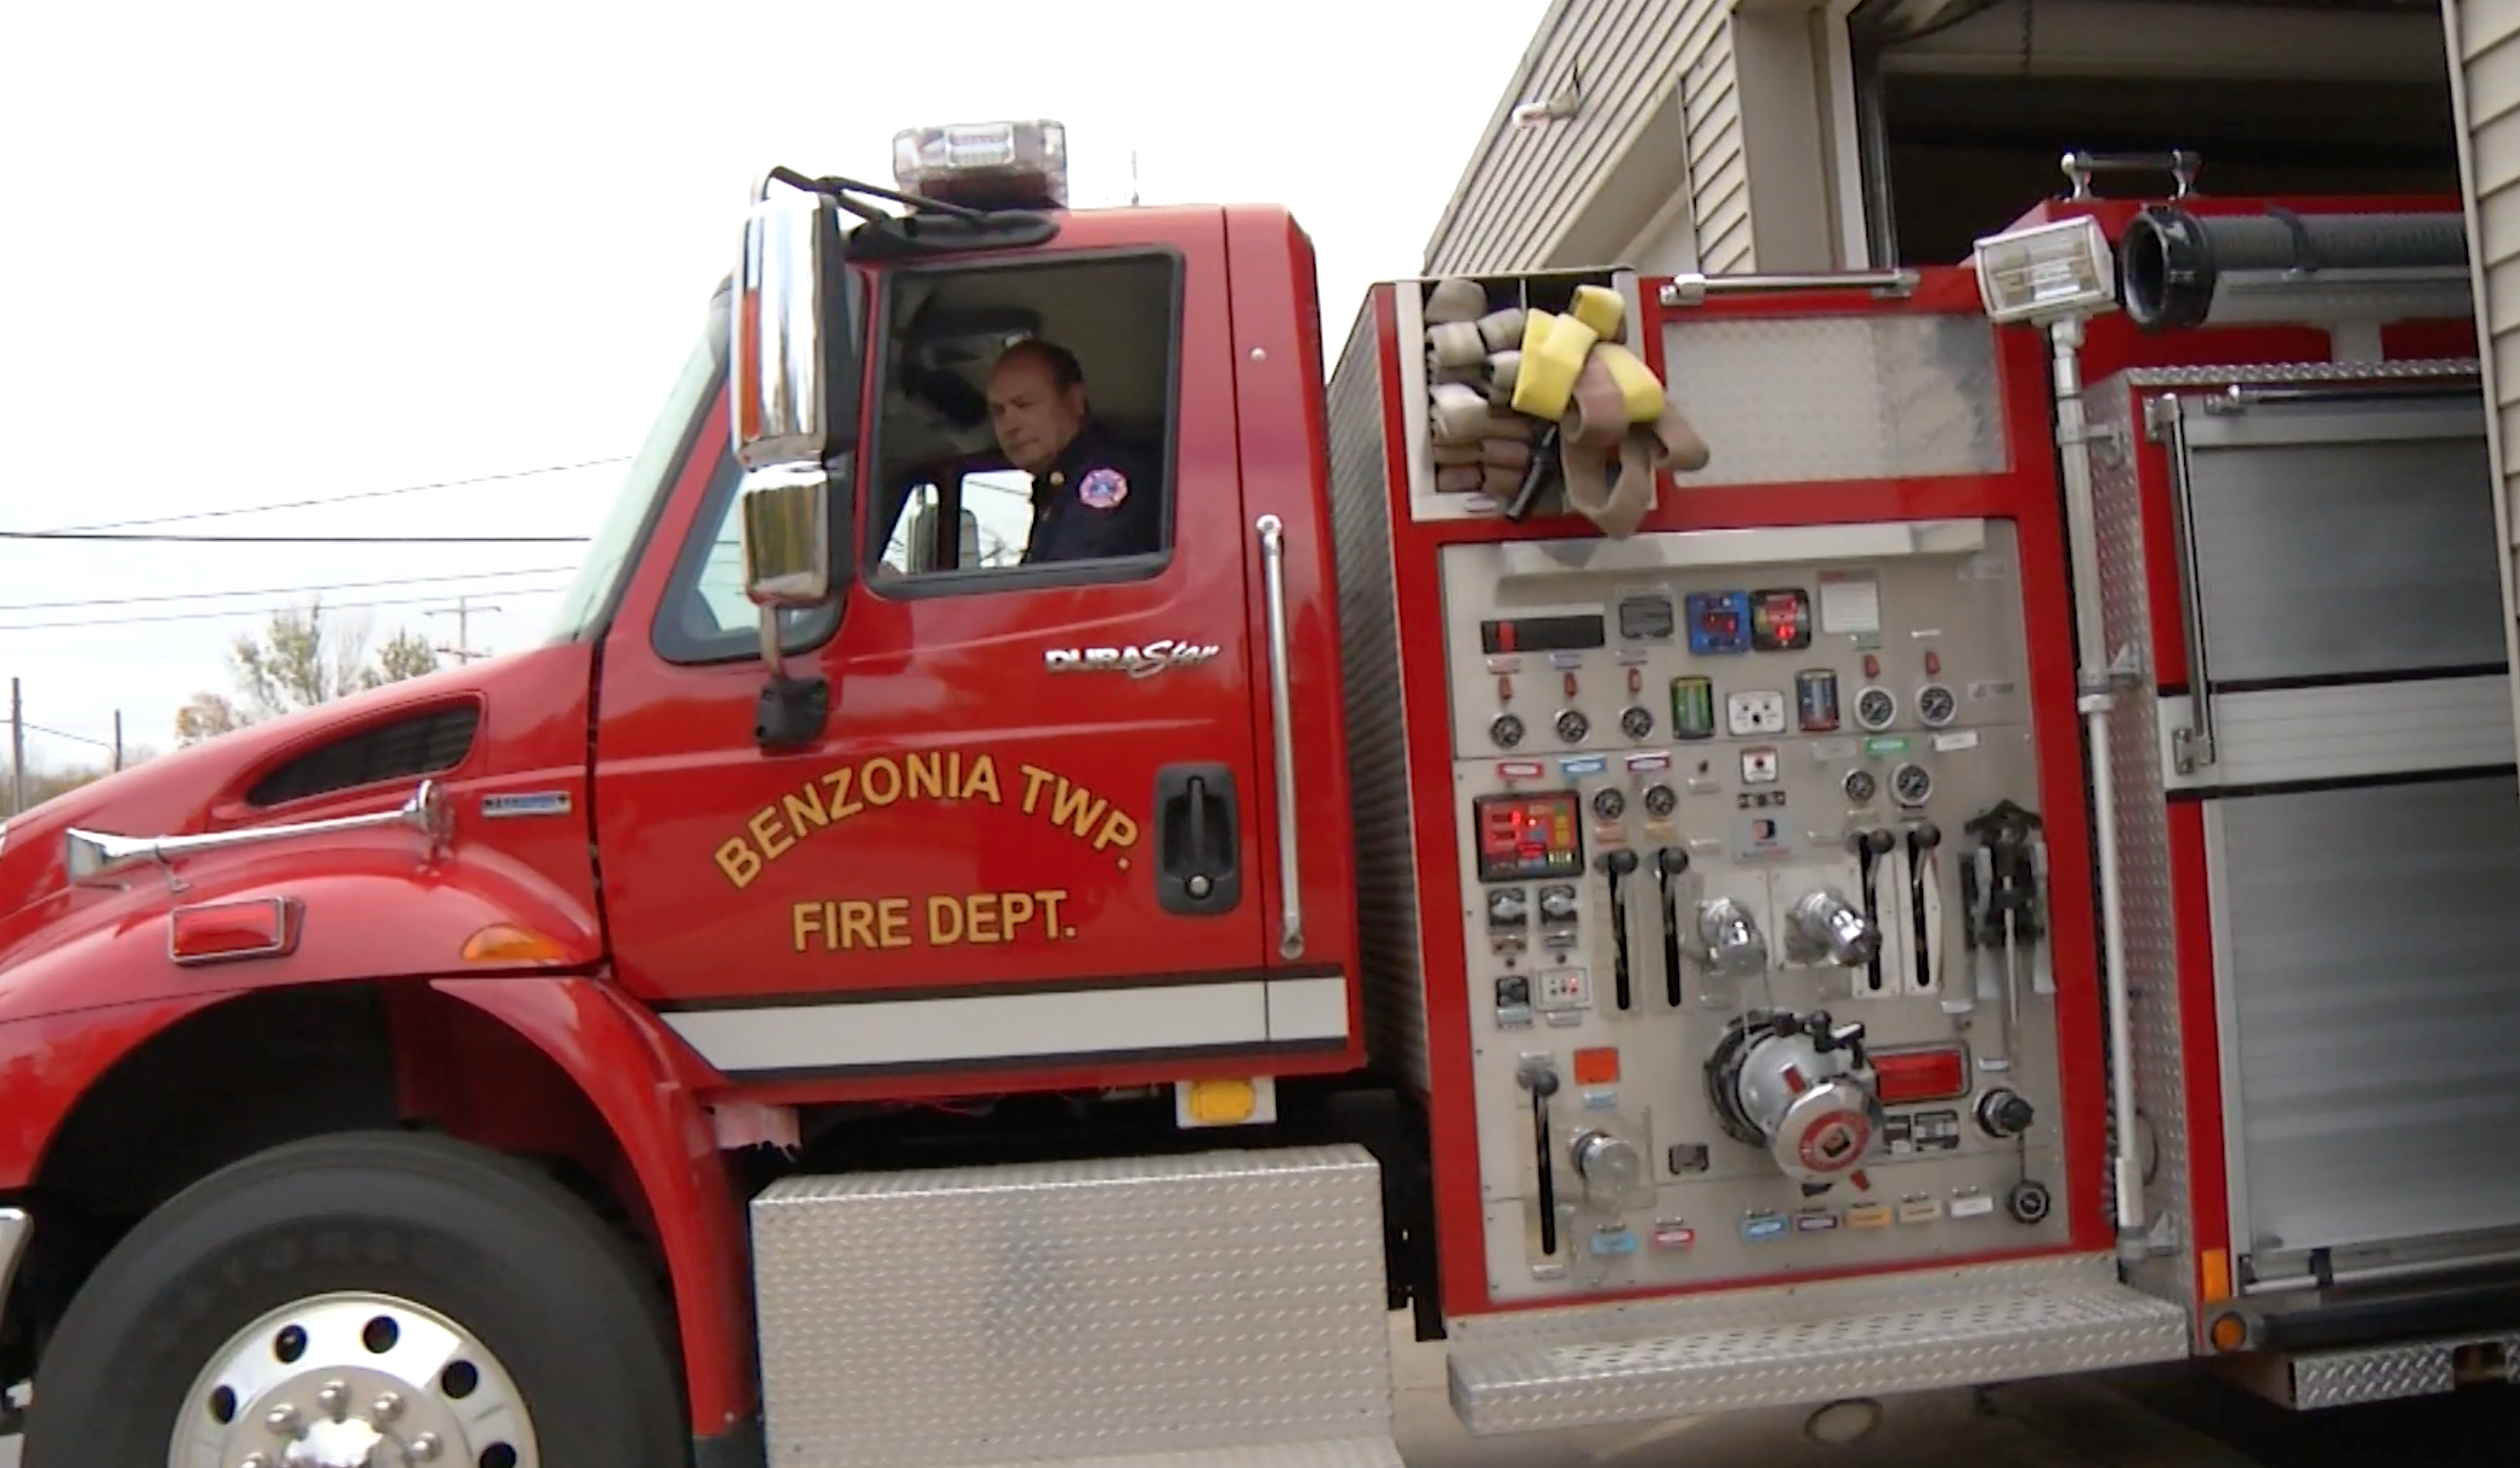 Benzonia Township Fire Department Truck